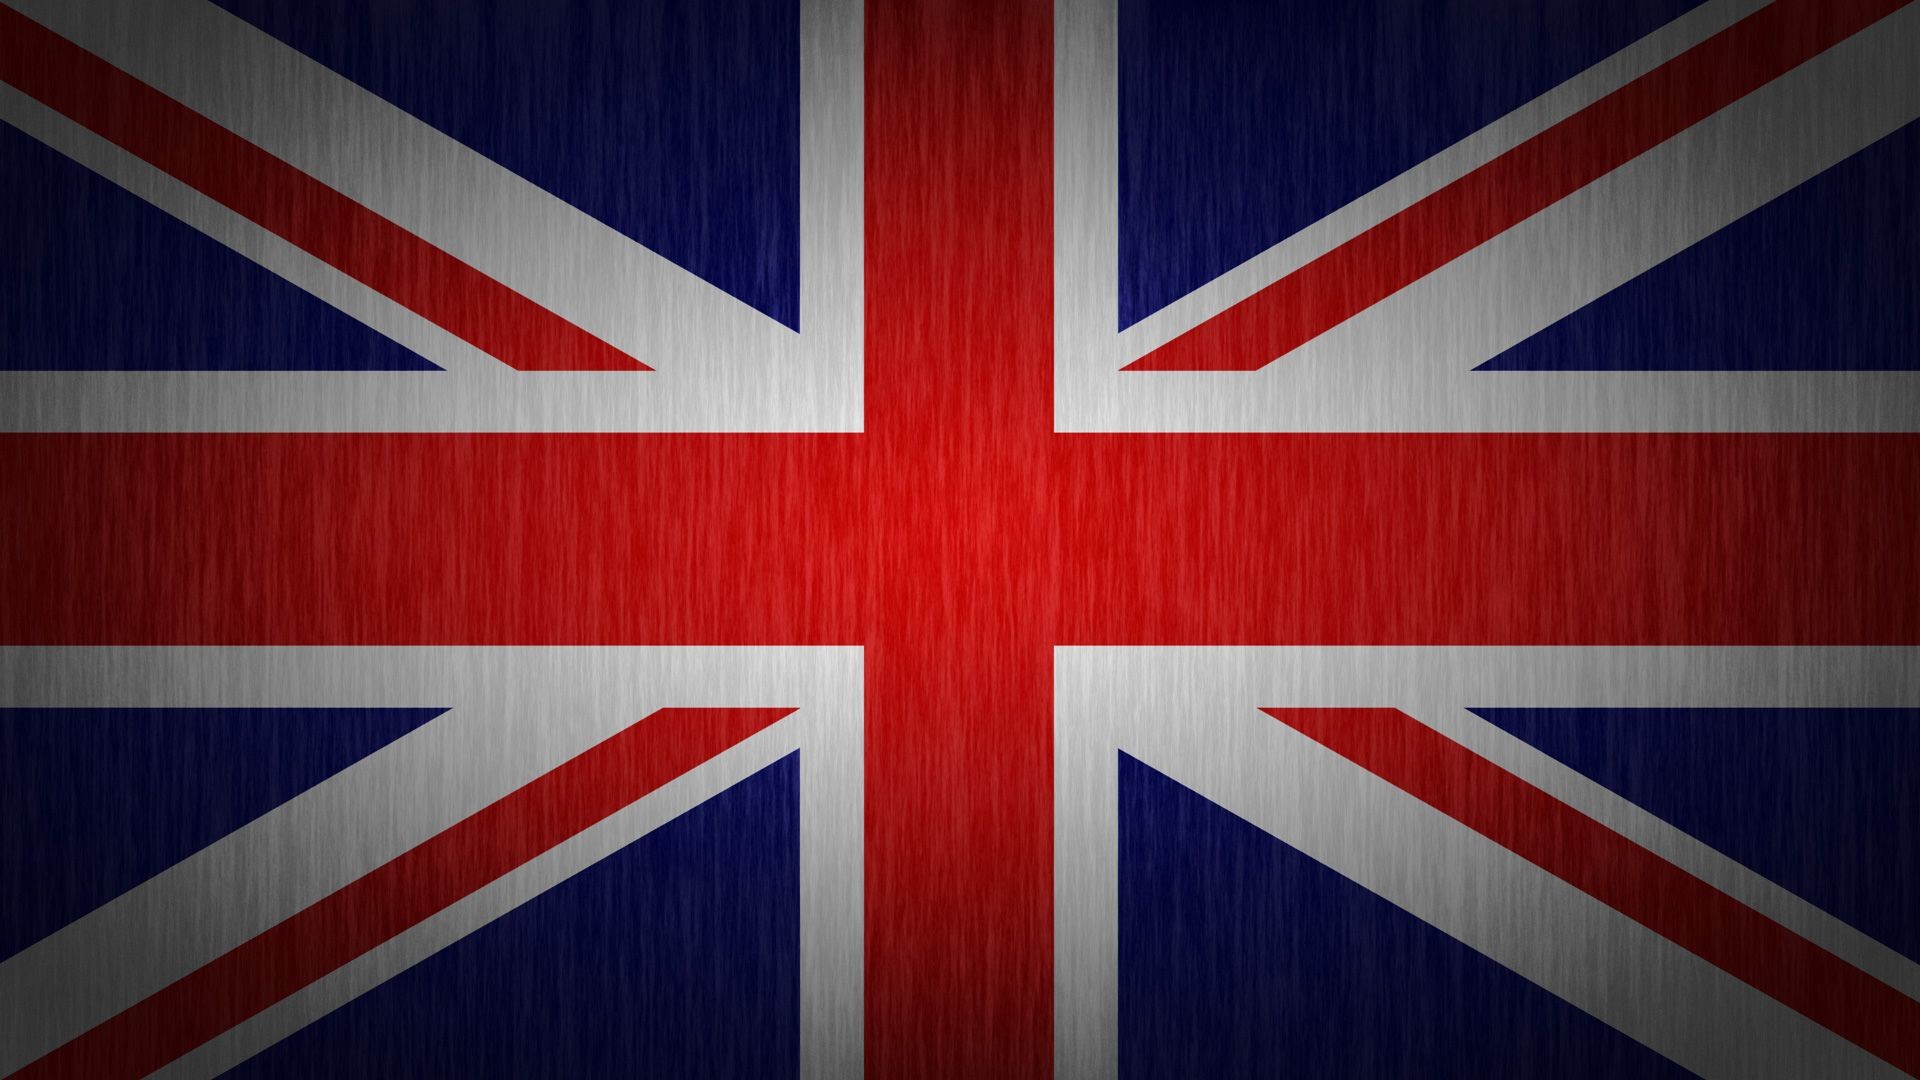 1920x1080 Uk flag wallpaper pictures